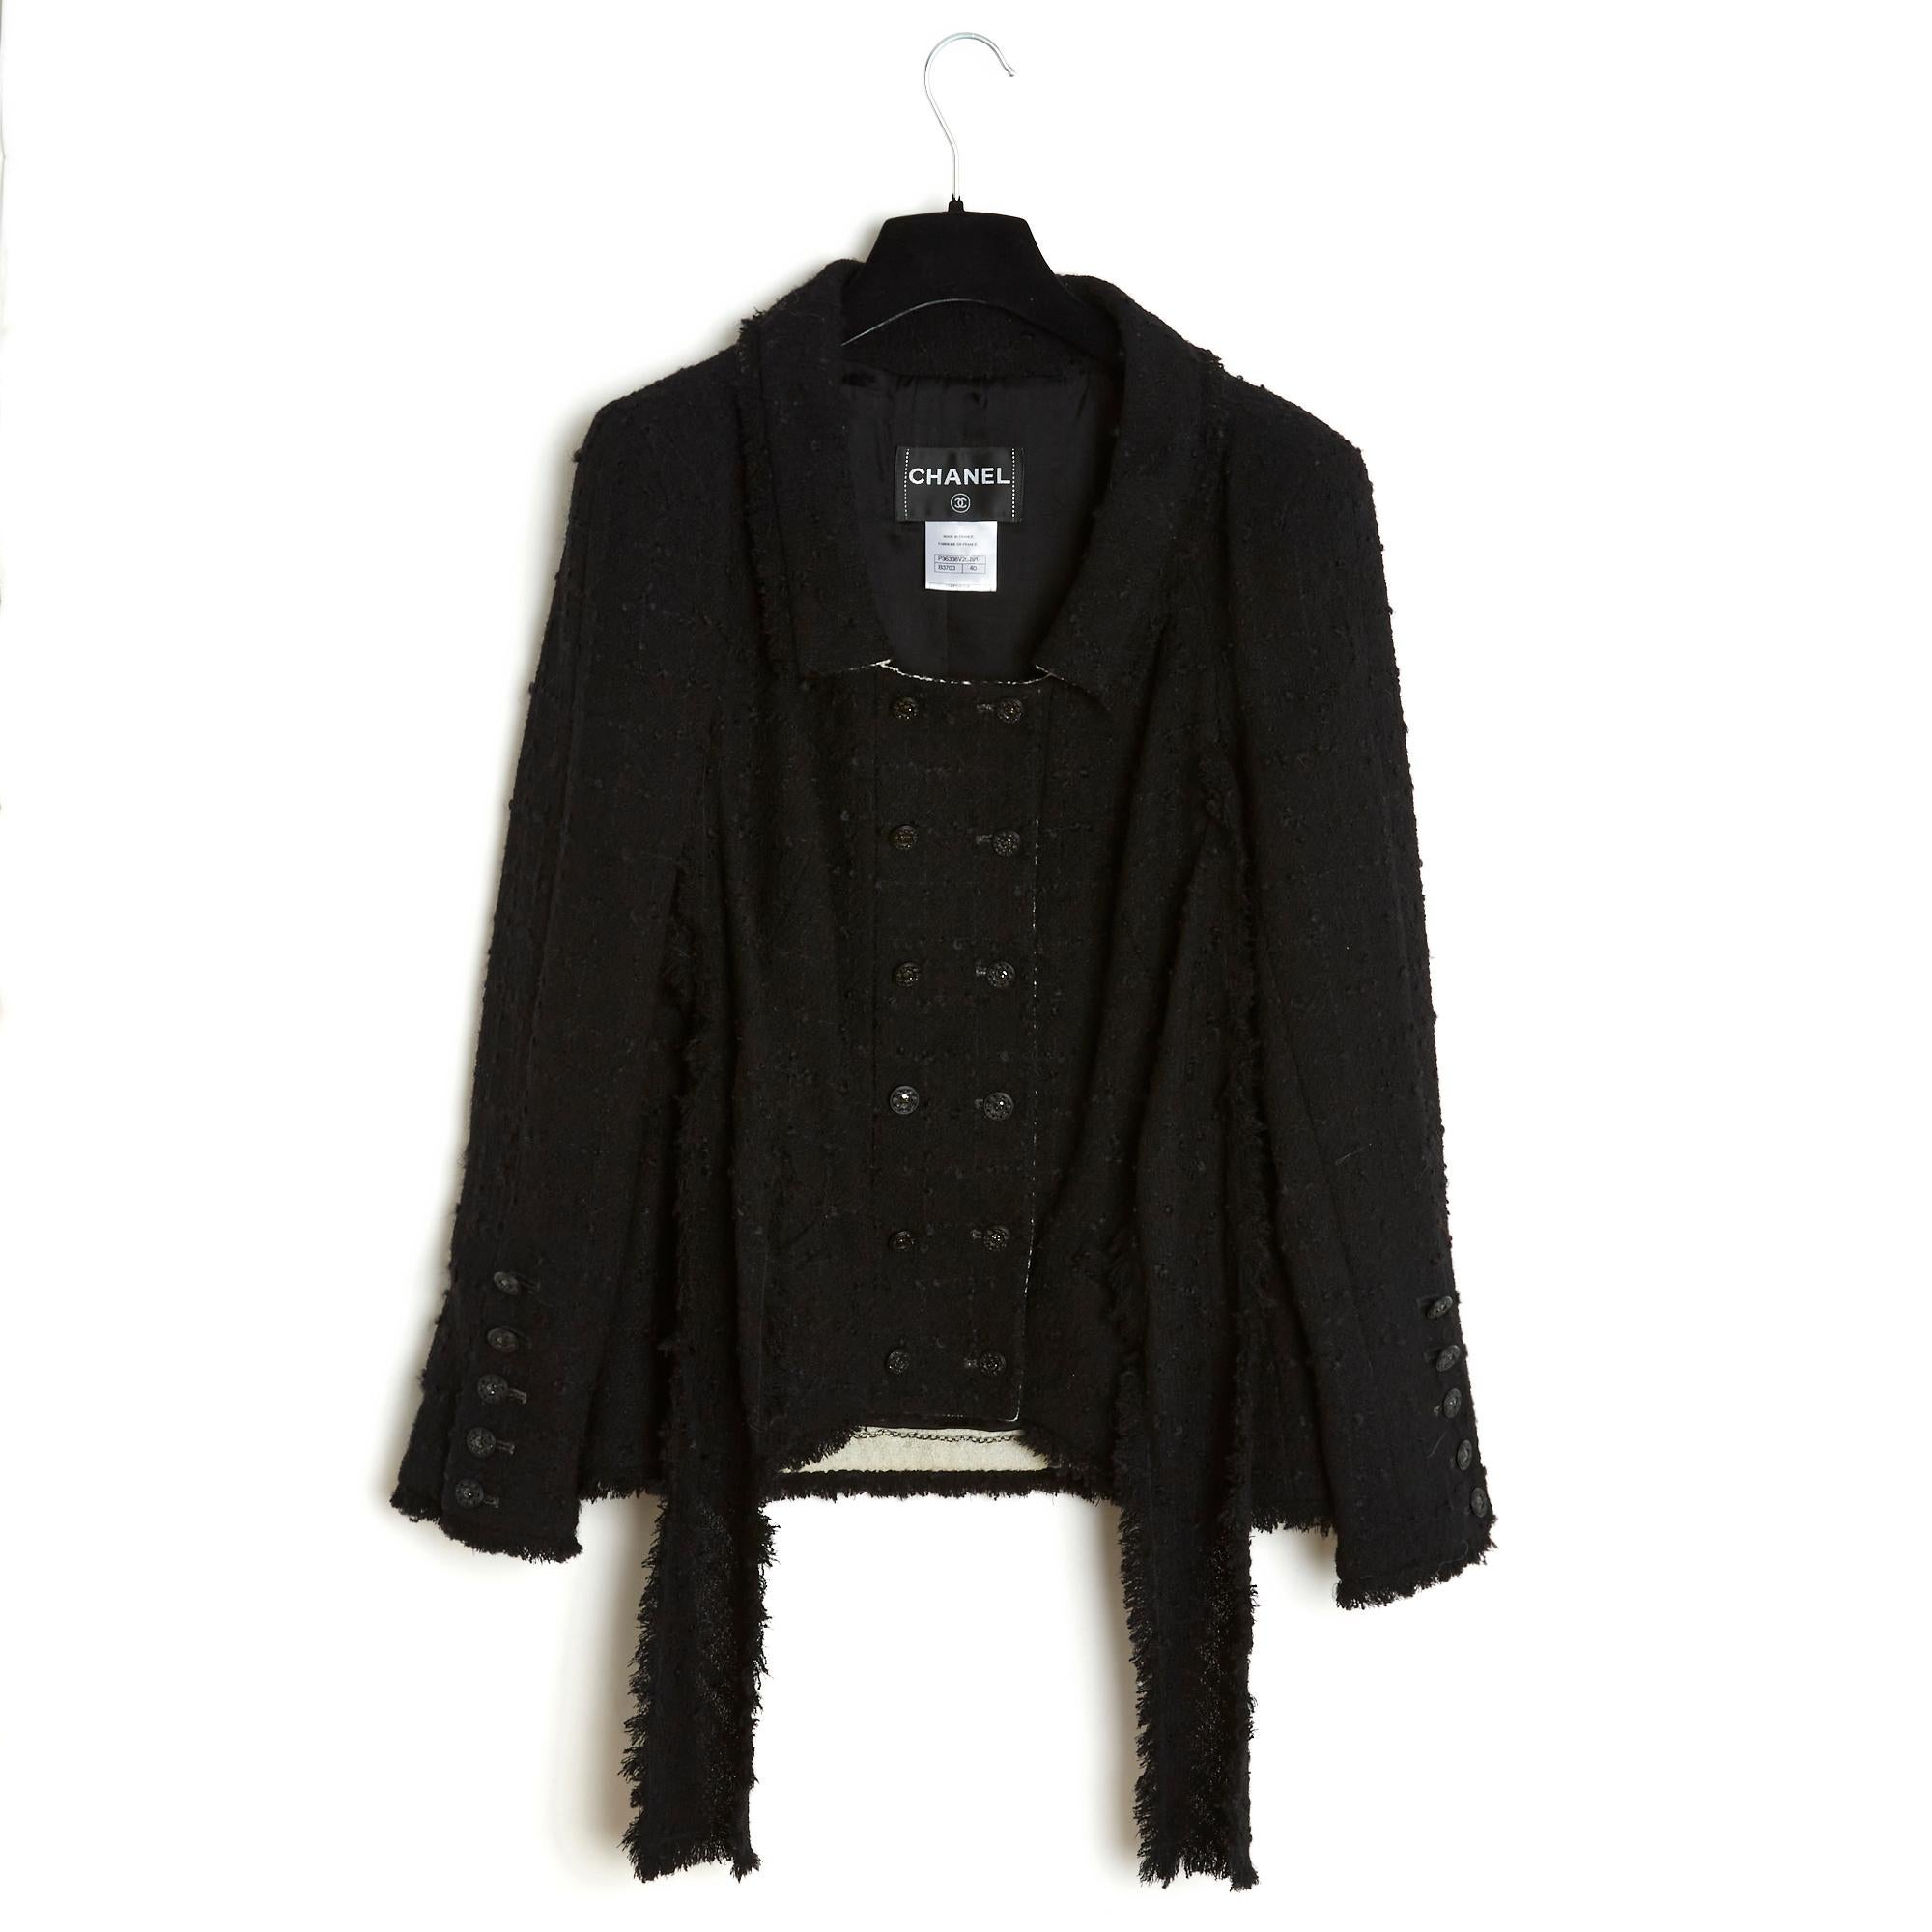 Chanel jacket Métiers d'Art Paris Moscow or Pre Fall 2009 collection in black wool blend tweed with a wide belt to tie in the front, or in the back (or not at all ;-), simple enlarged collar, cross closure in front with 2 rows of 6 jeweled buttons,